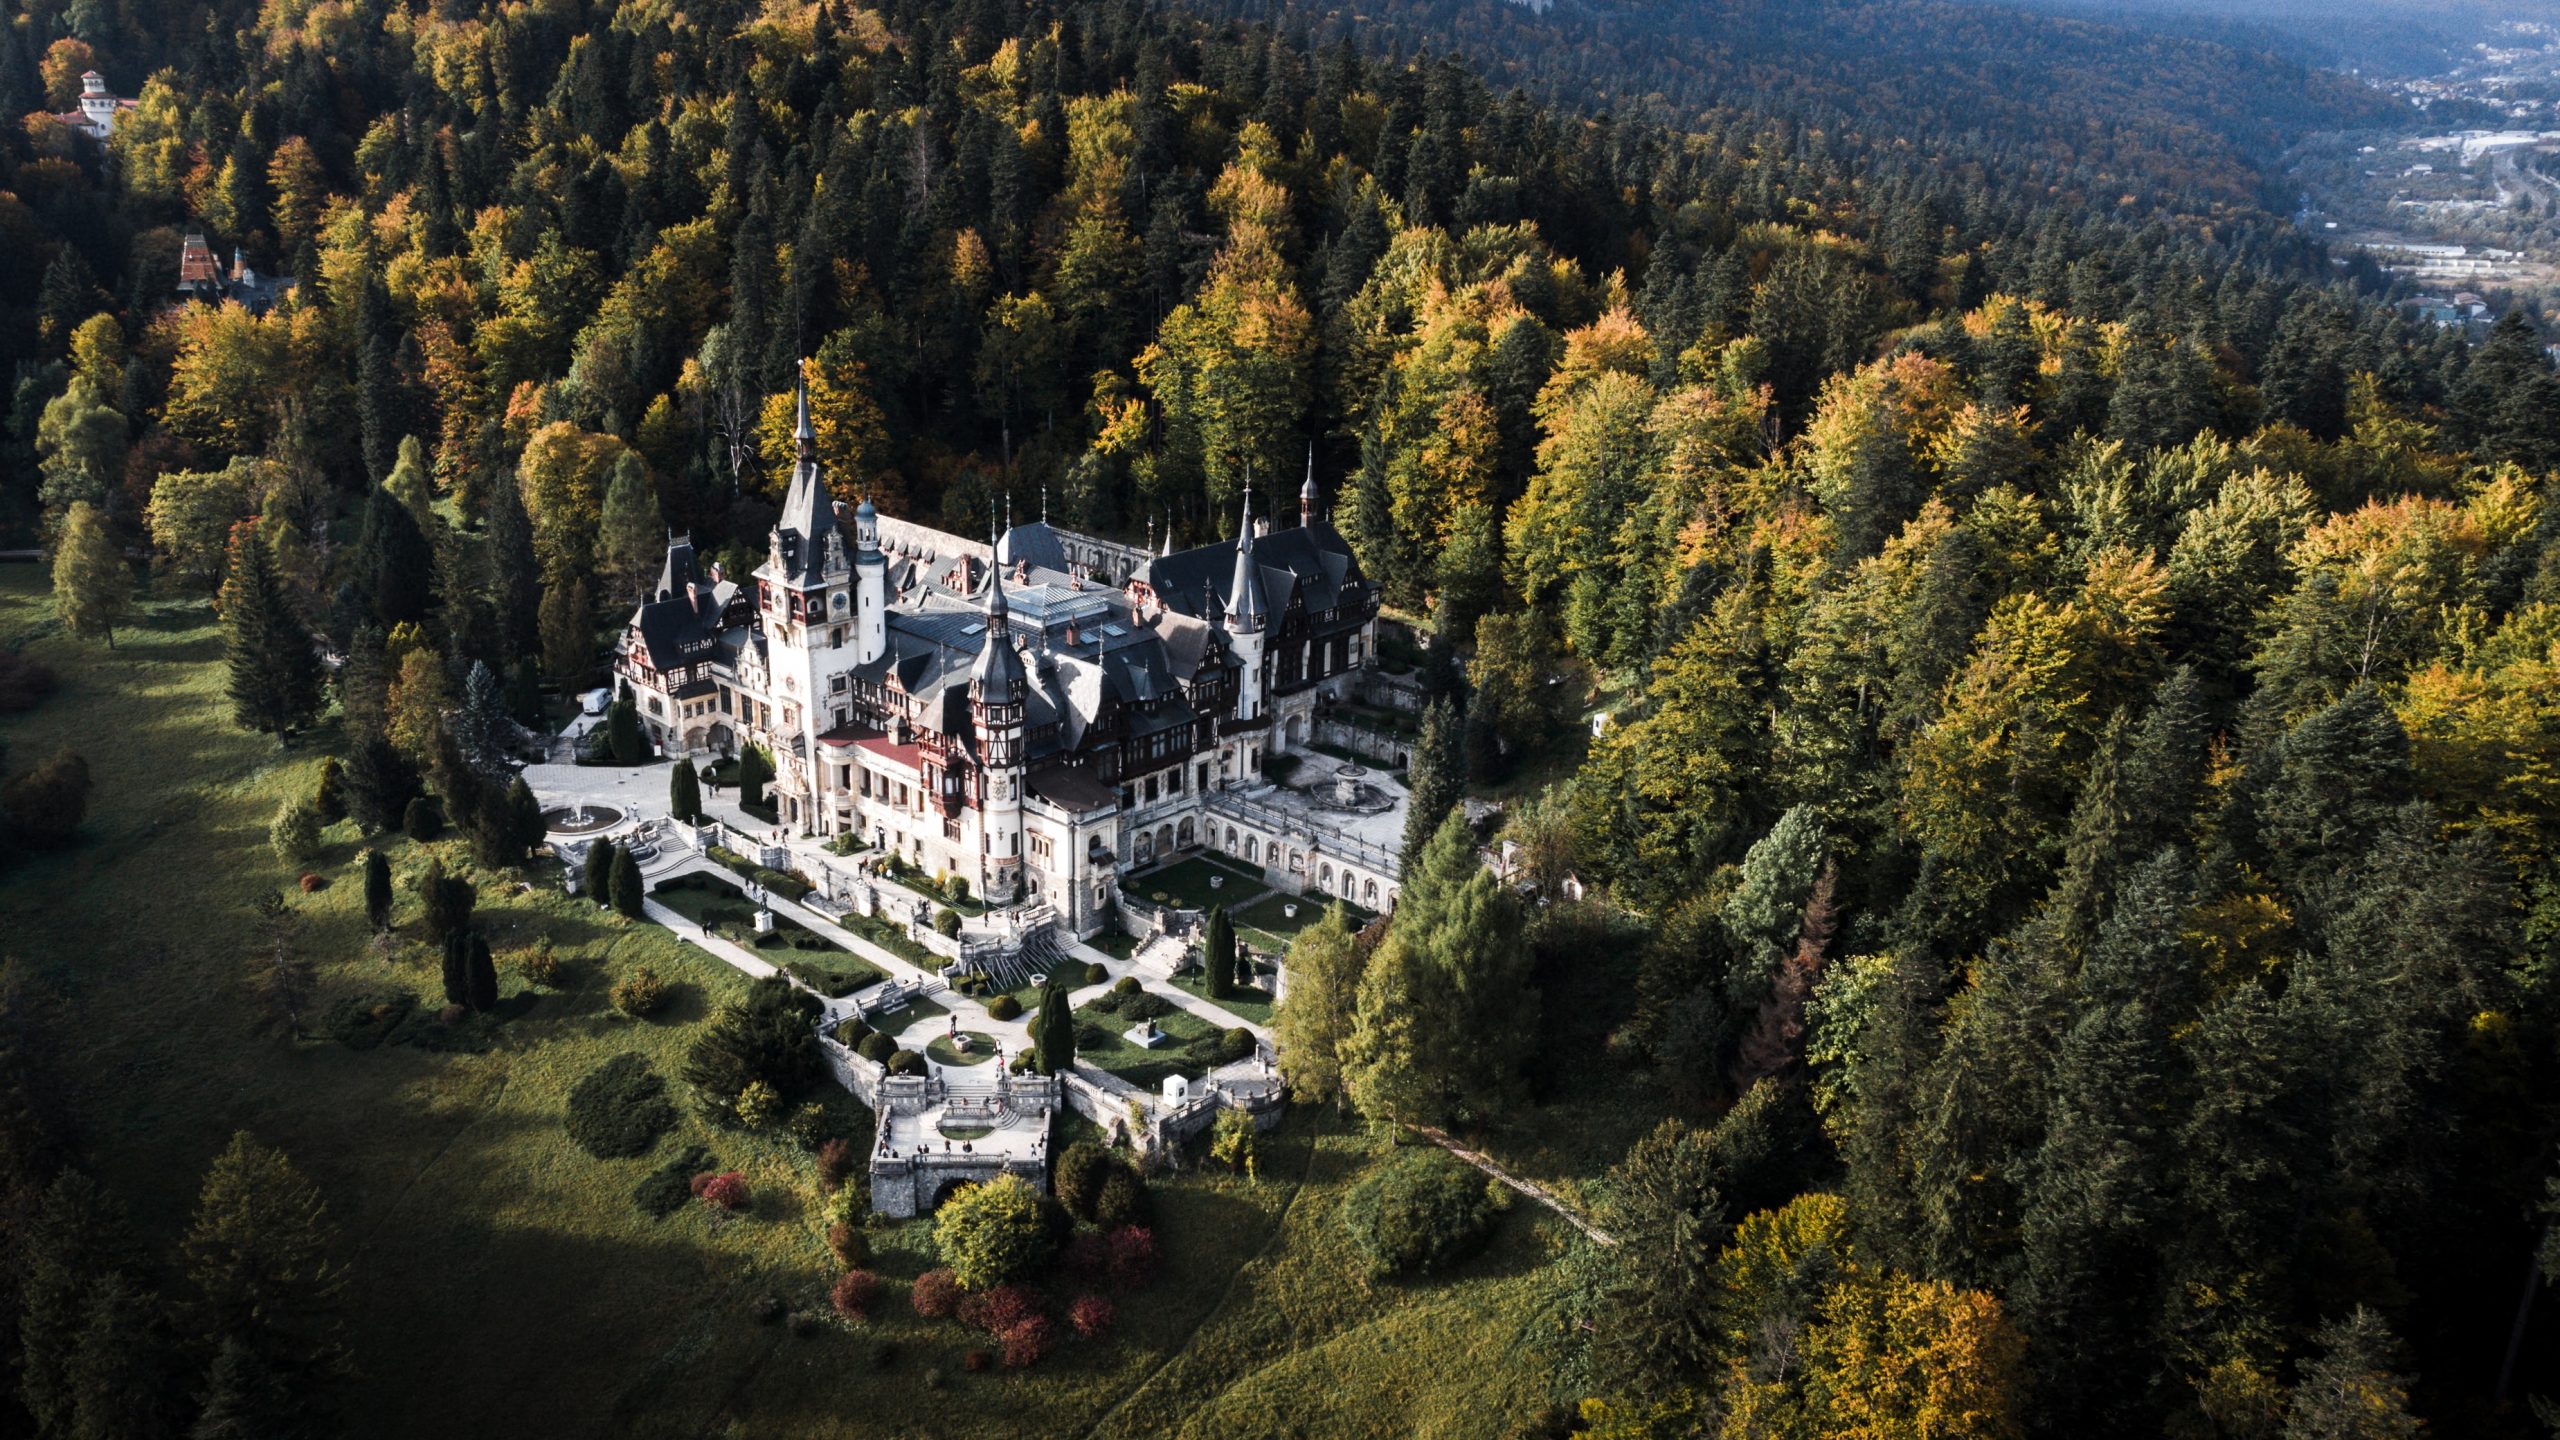 Peles castle in Romania is one of the most beautiful places in the country